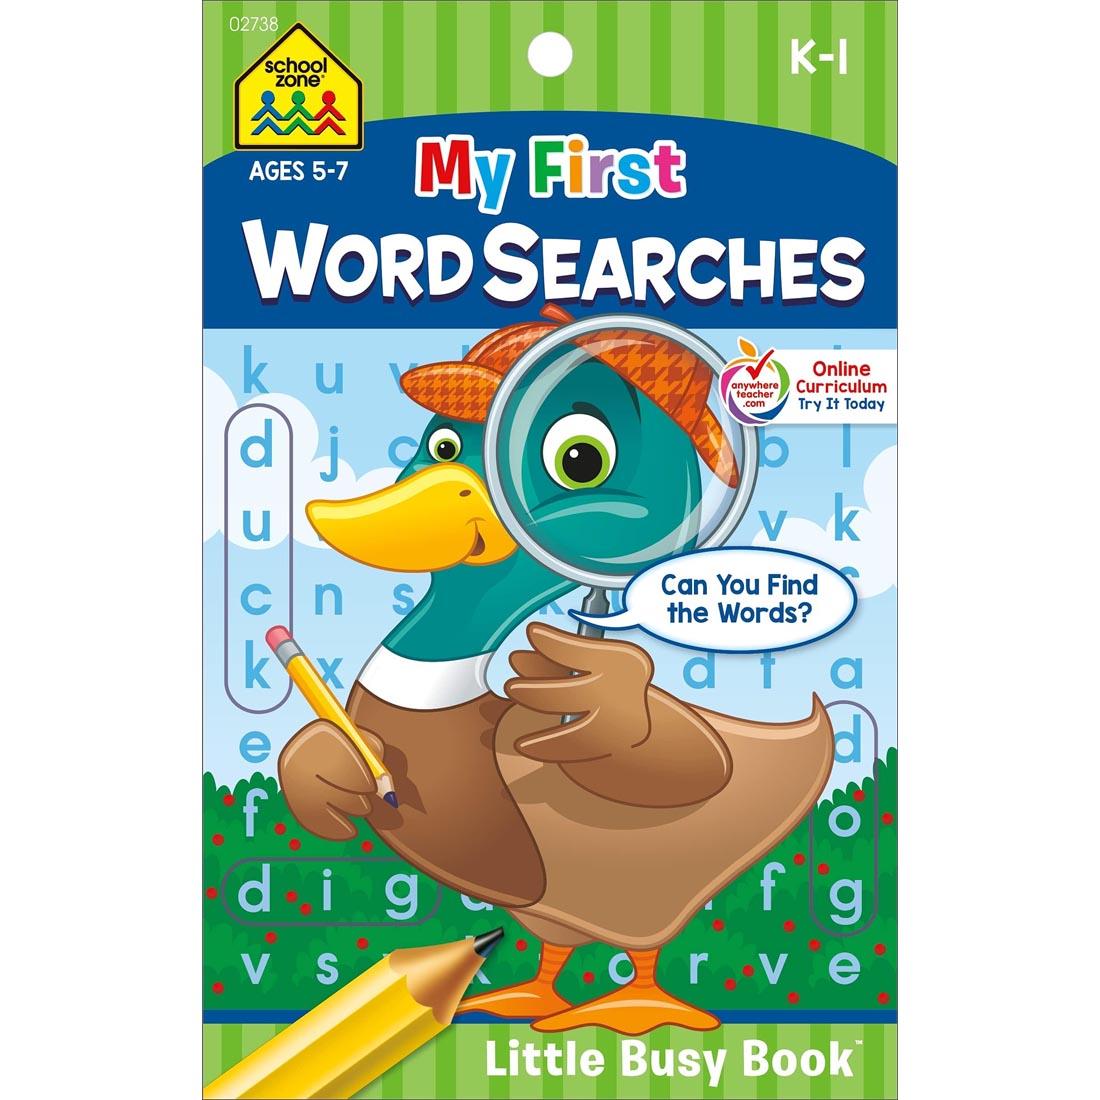 Cover of School Zone My First Word Searches Little Busy Book